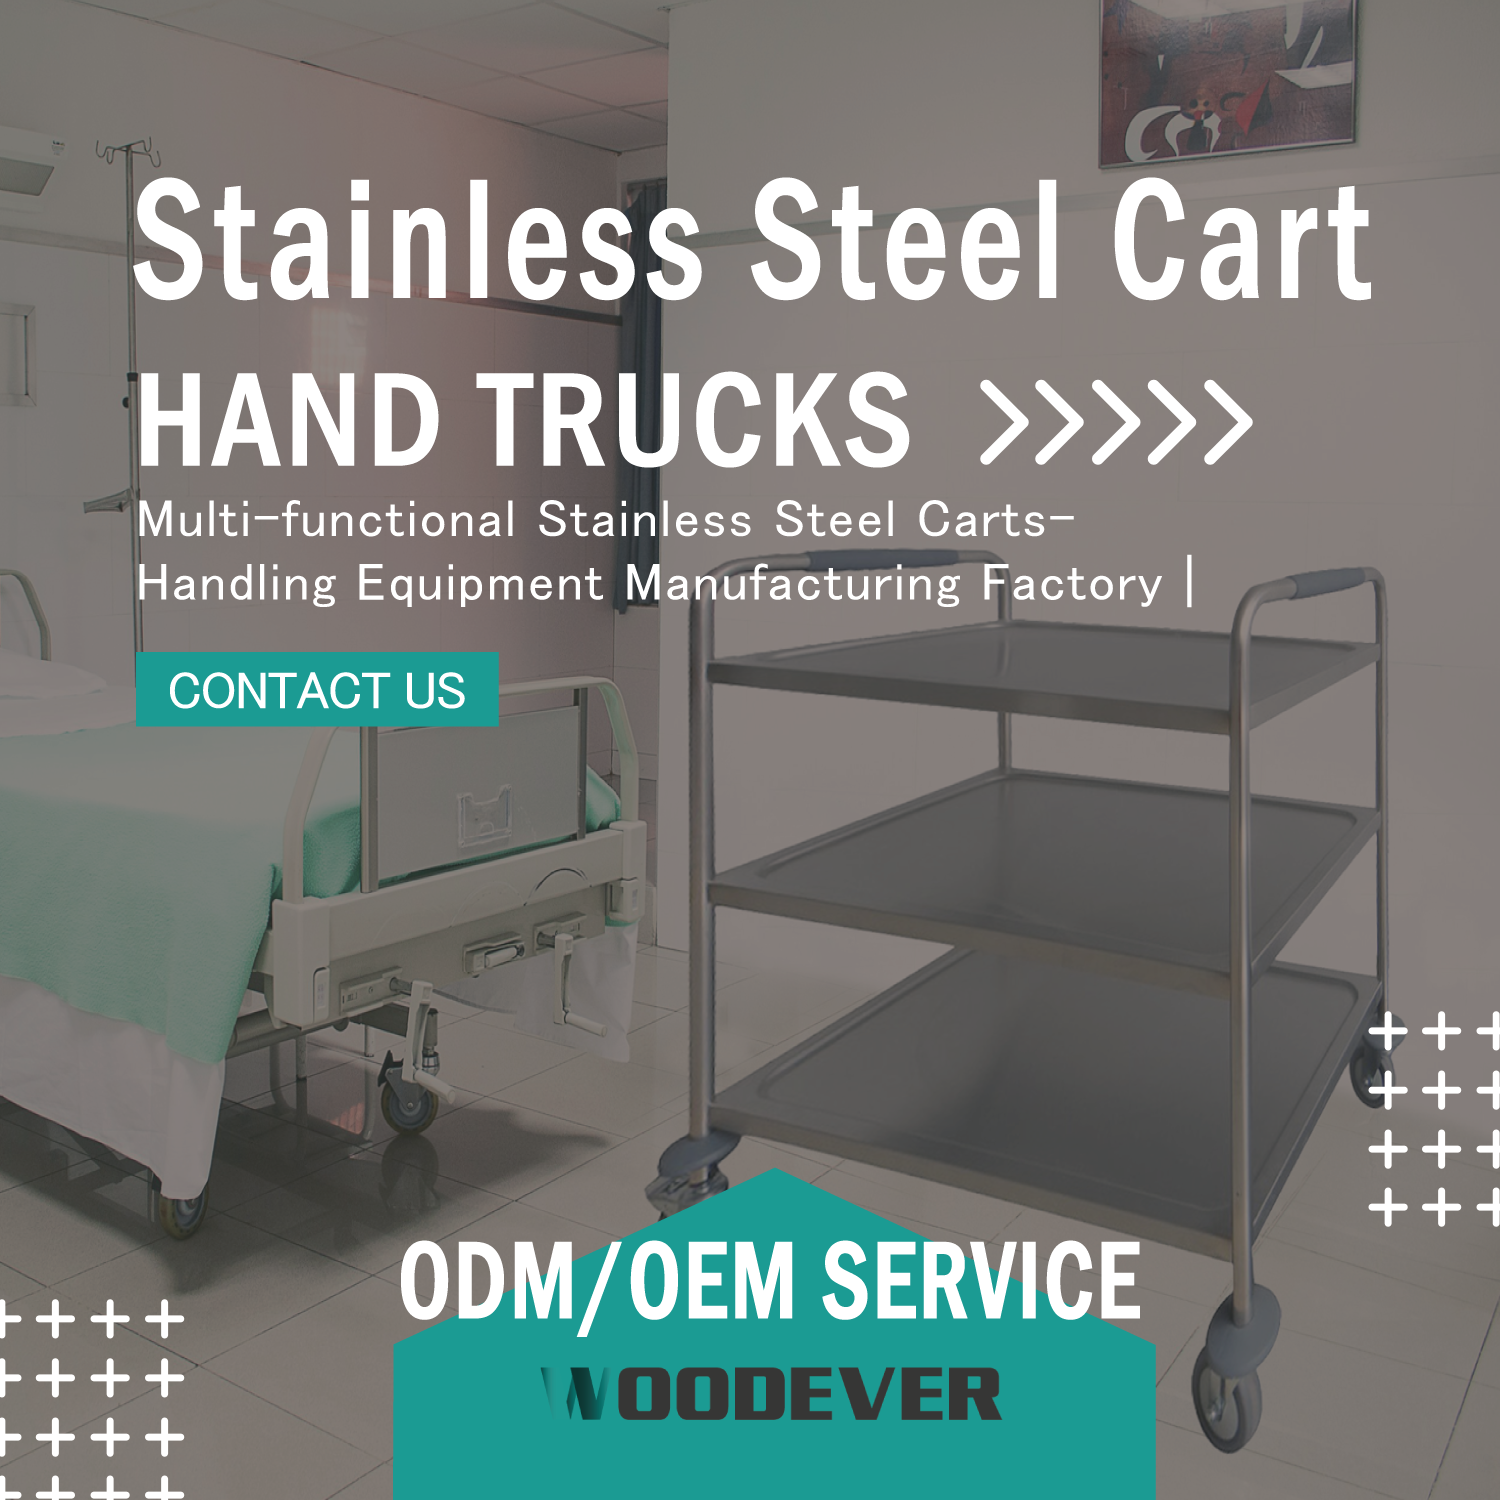 Stainless steel trolleys are corrosion resistant and suitable for transporting highly corrosive chemicals.